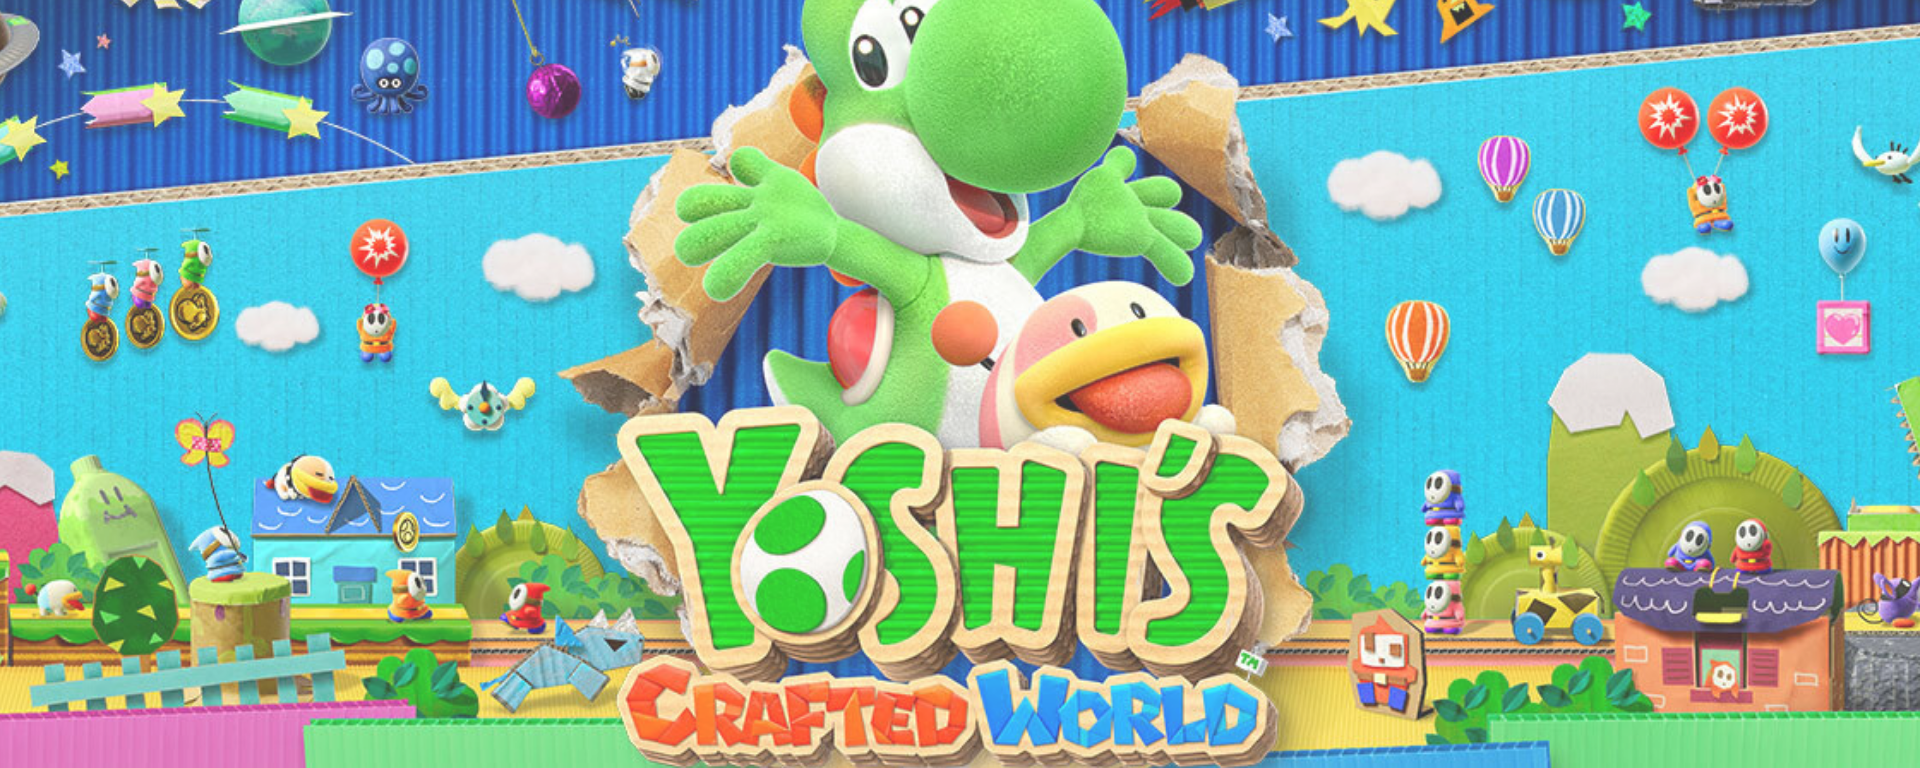 Review: Yoshi's Crafted World on Nintendo Switch – Geek Gals